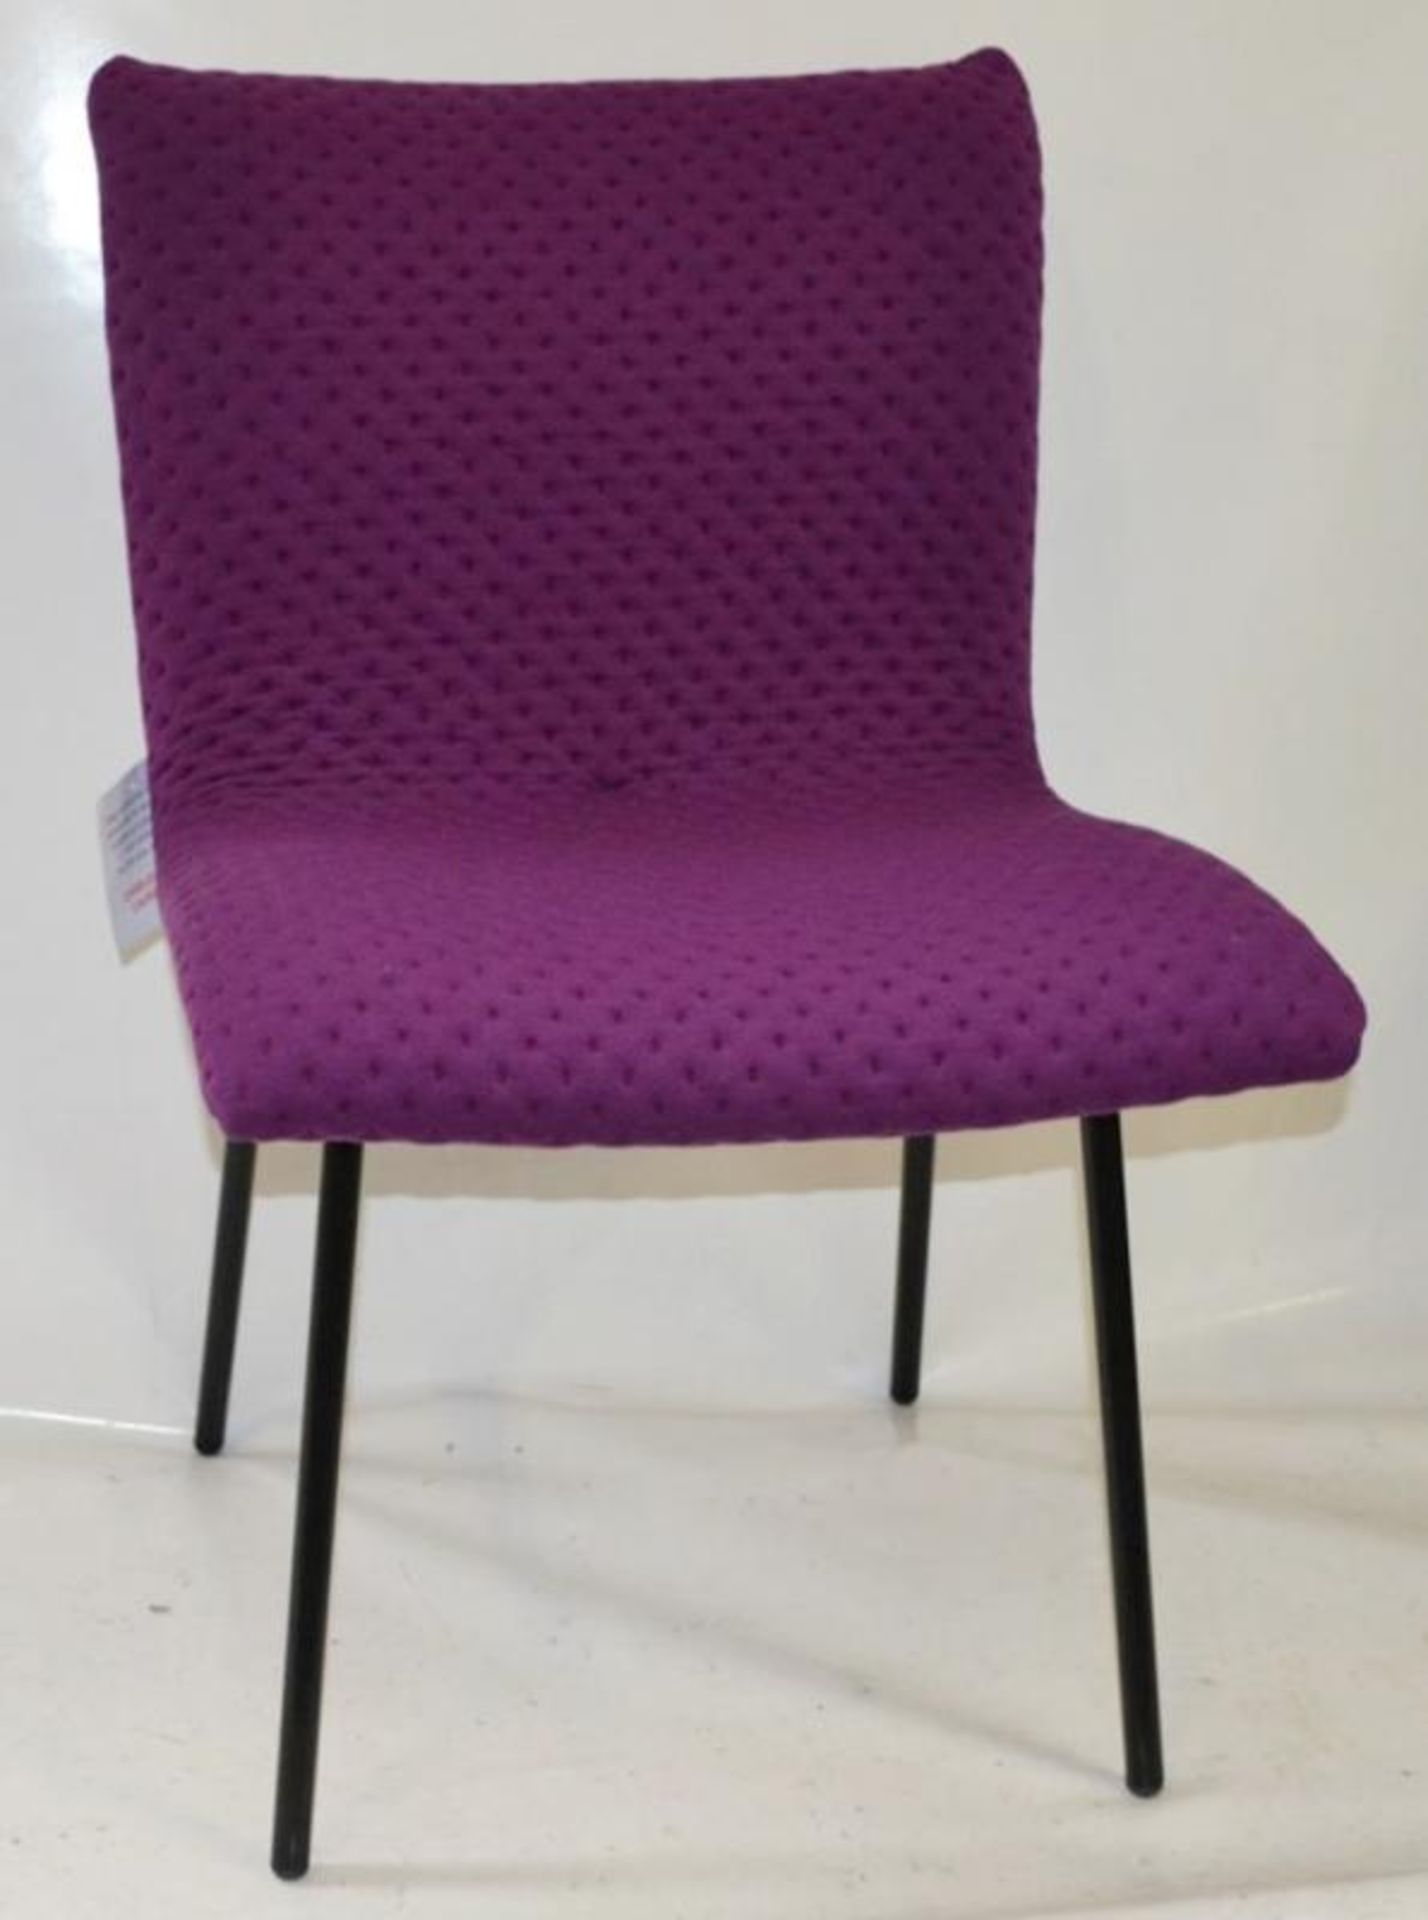 1 x Ligne Roset 'Calin' Chair - Features Bright Purple Upholsterey - Made In France - Ref: 6206608 P - Image 2 of 7